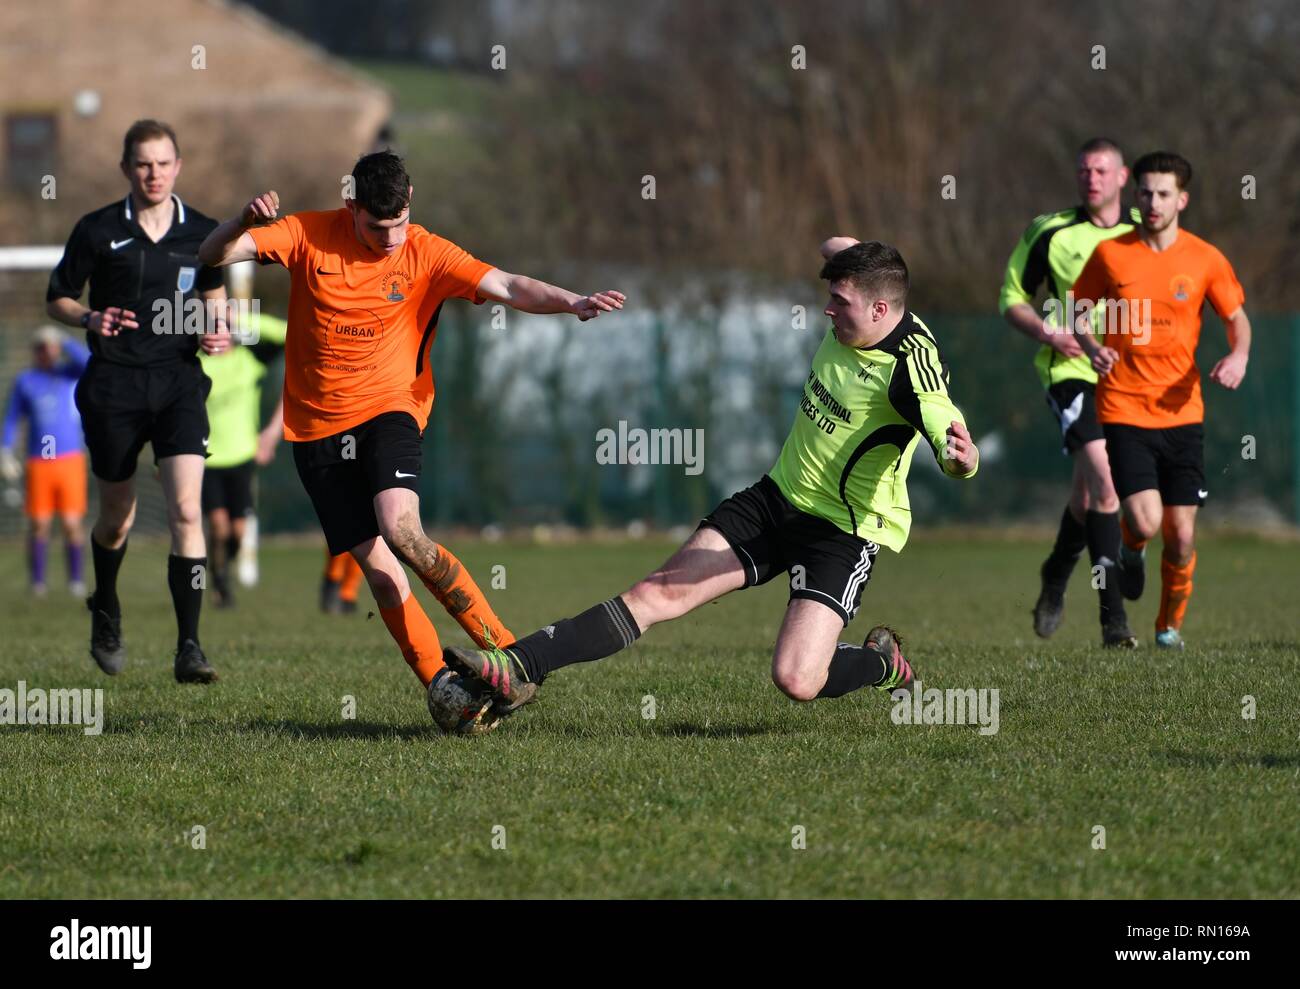 Football Action From An Amateur Match Between Faifield Fc And Hathersage Fc In The Hope Valley Amateur League Stock Photo Alamy